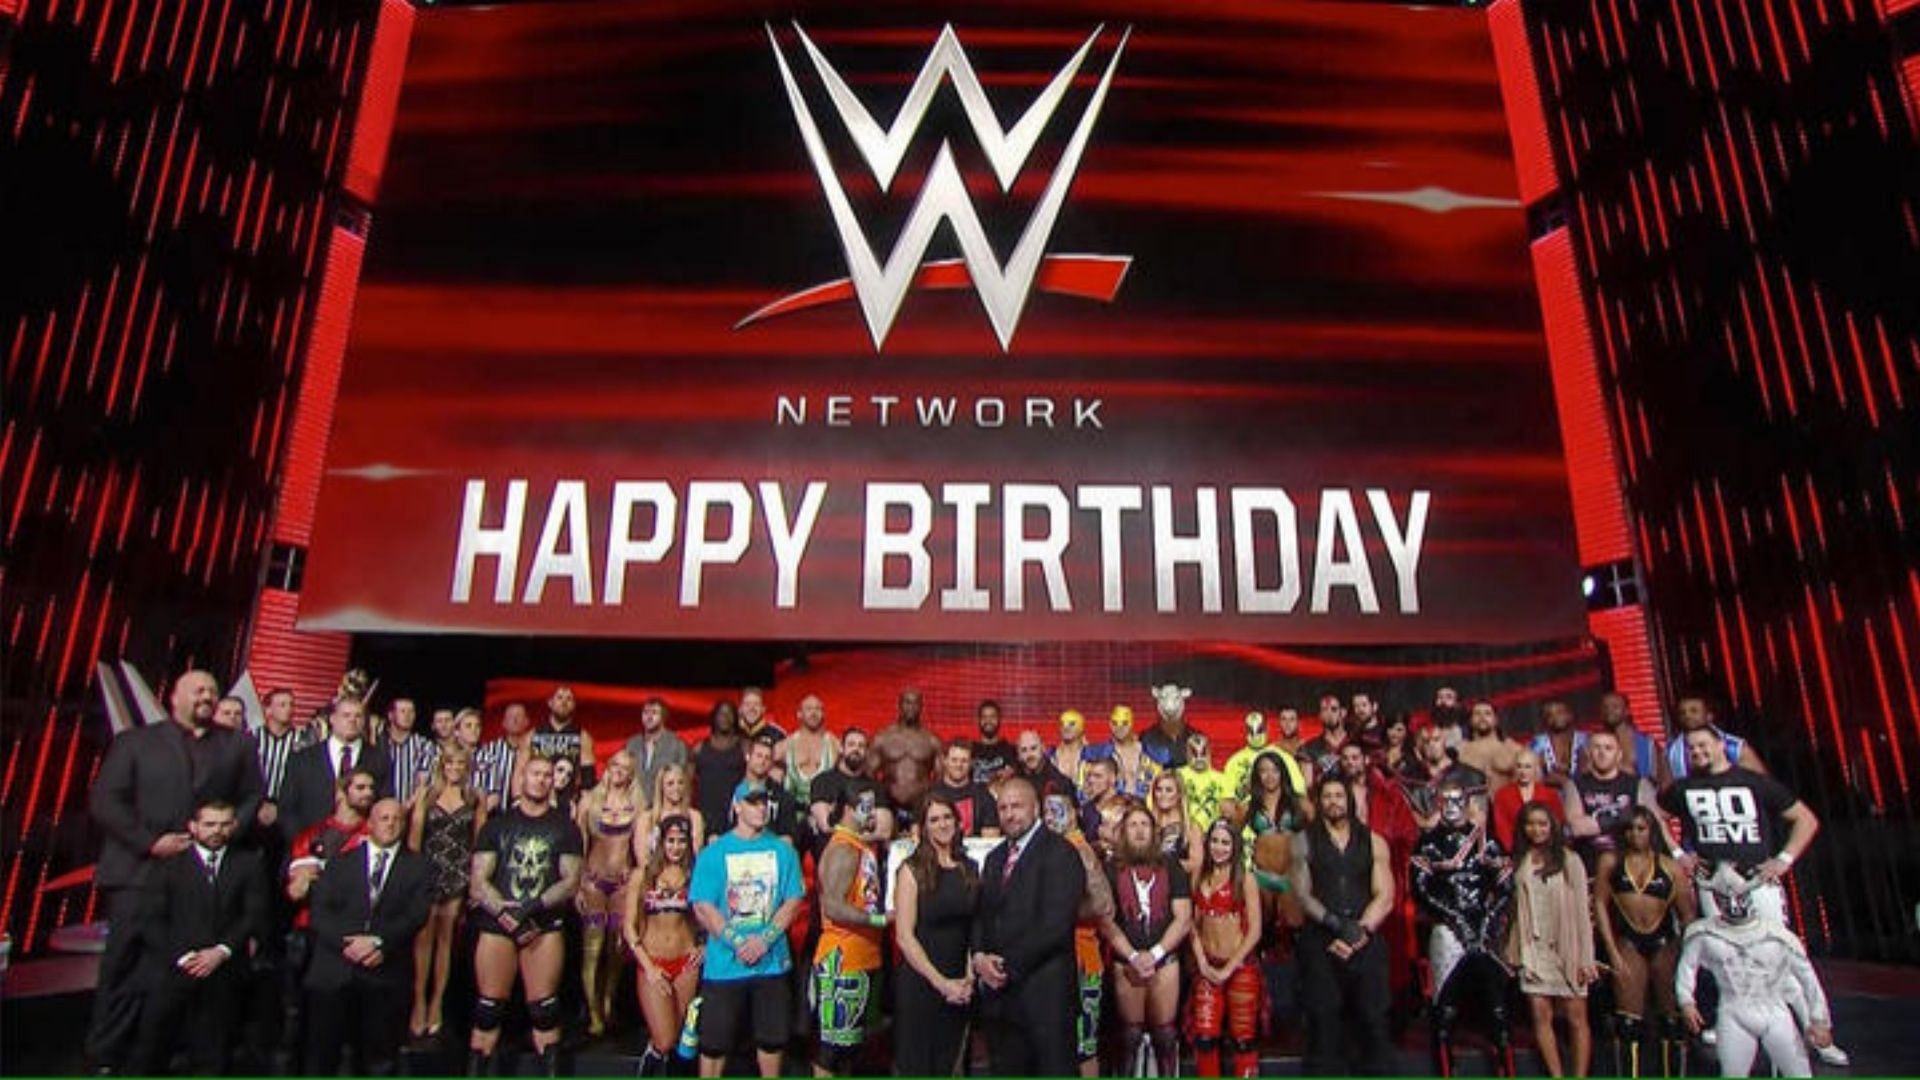 A top WWE star has a birthday message to his wife.